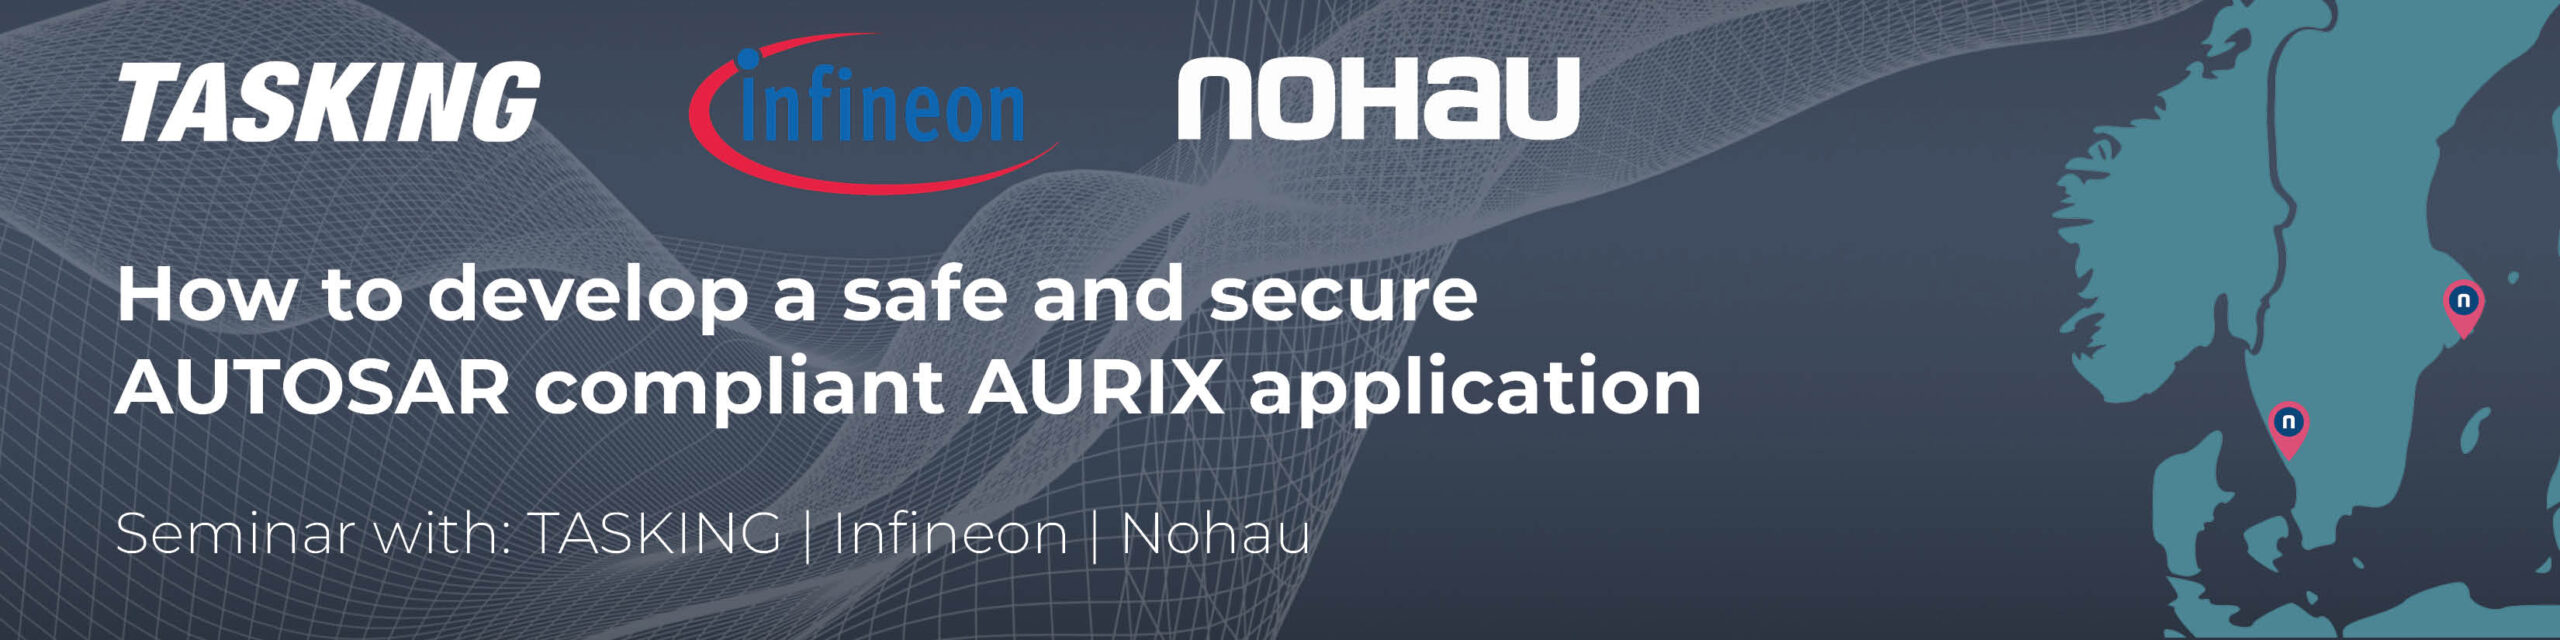 How to develop a safe and secure AUTOSAR compliant AURIX application